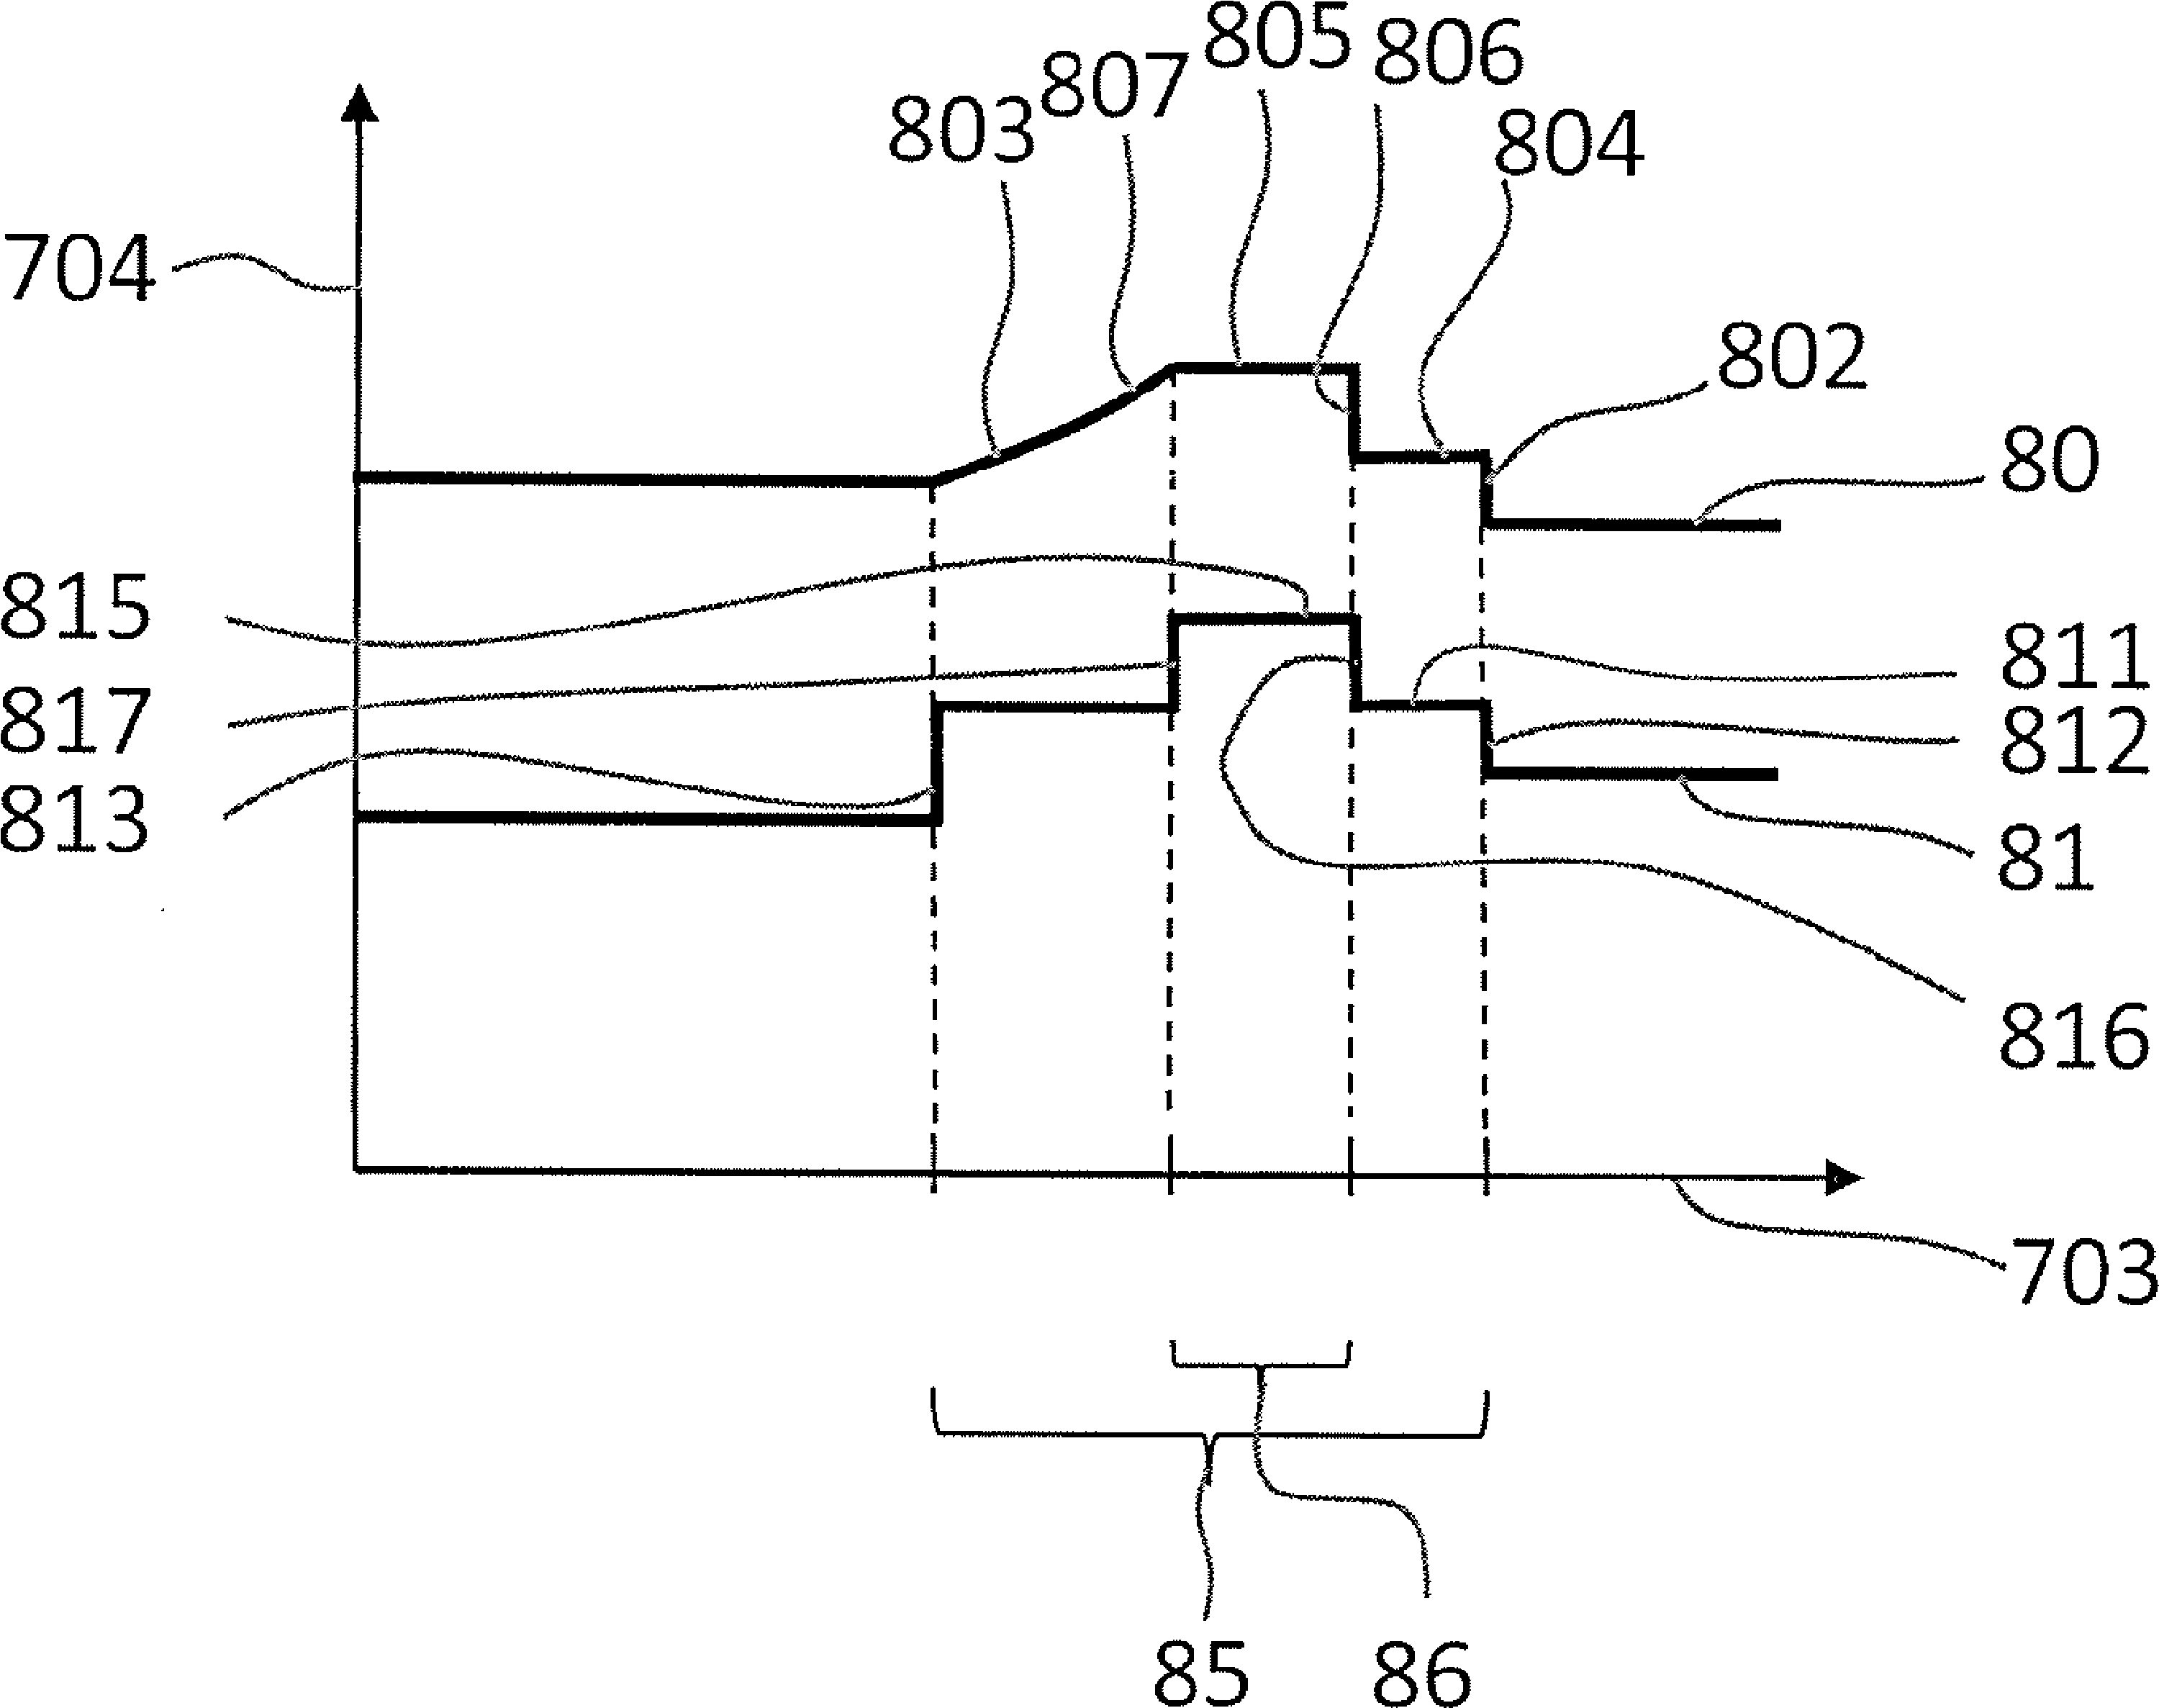 Method of operating turbine engine after flame off